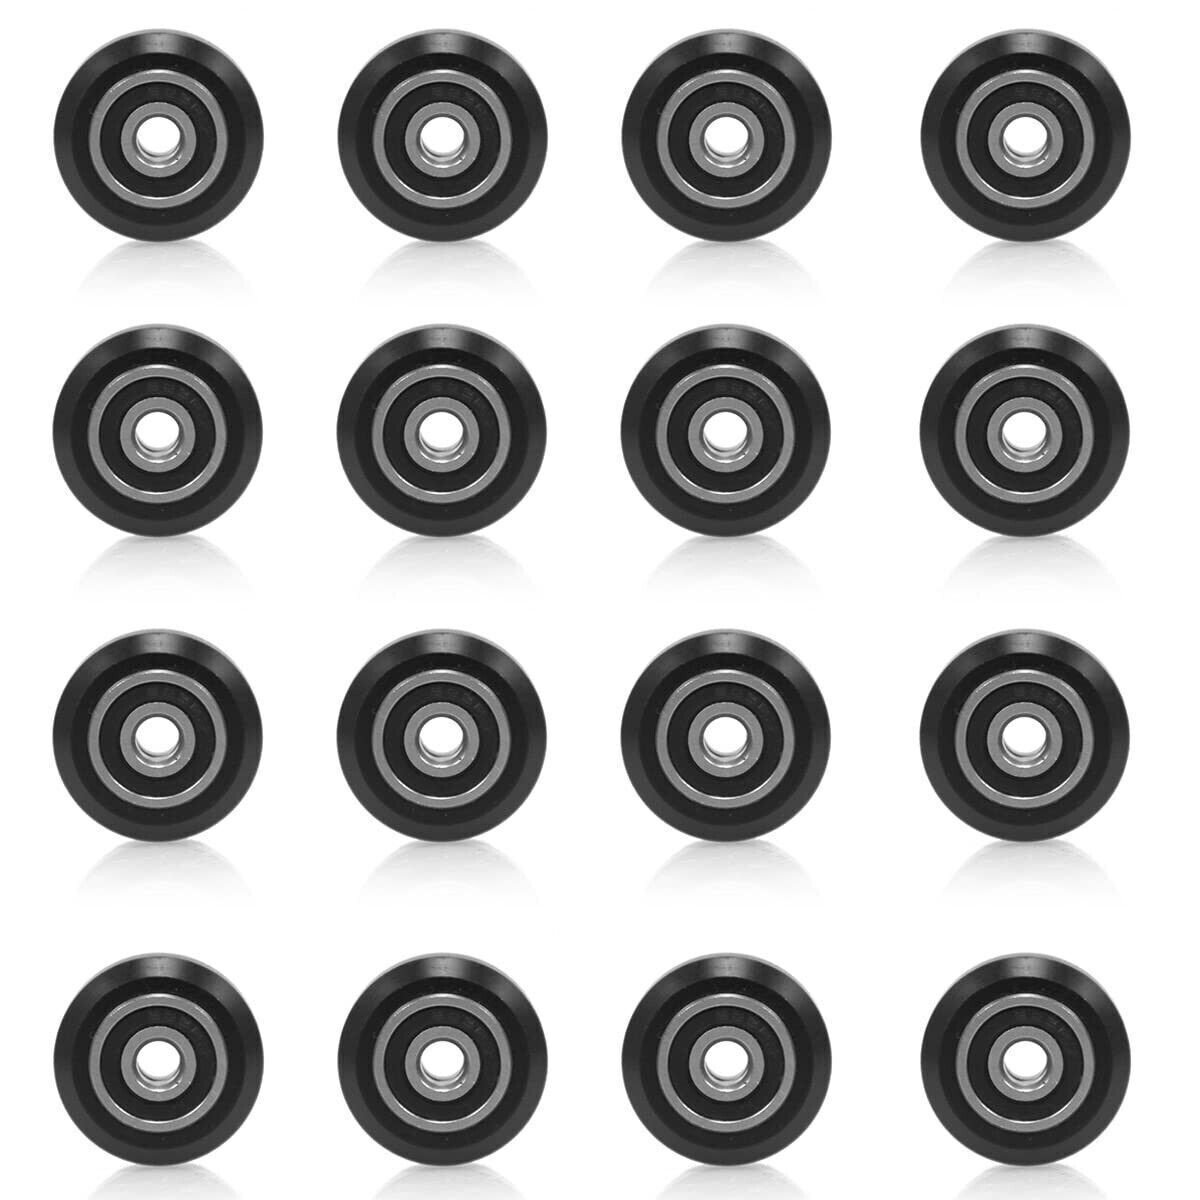 48pcs Rubber Bearing 3D Printer POM Wheels Pulley Anycubic Anet CR10 Ender 3